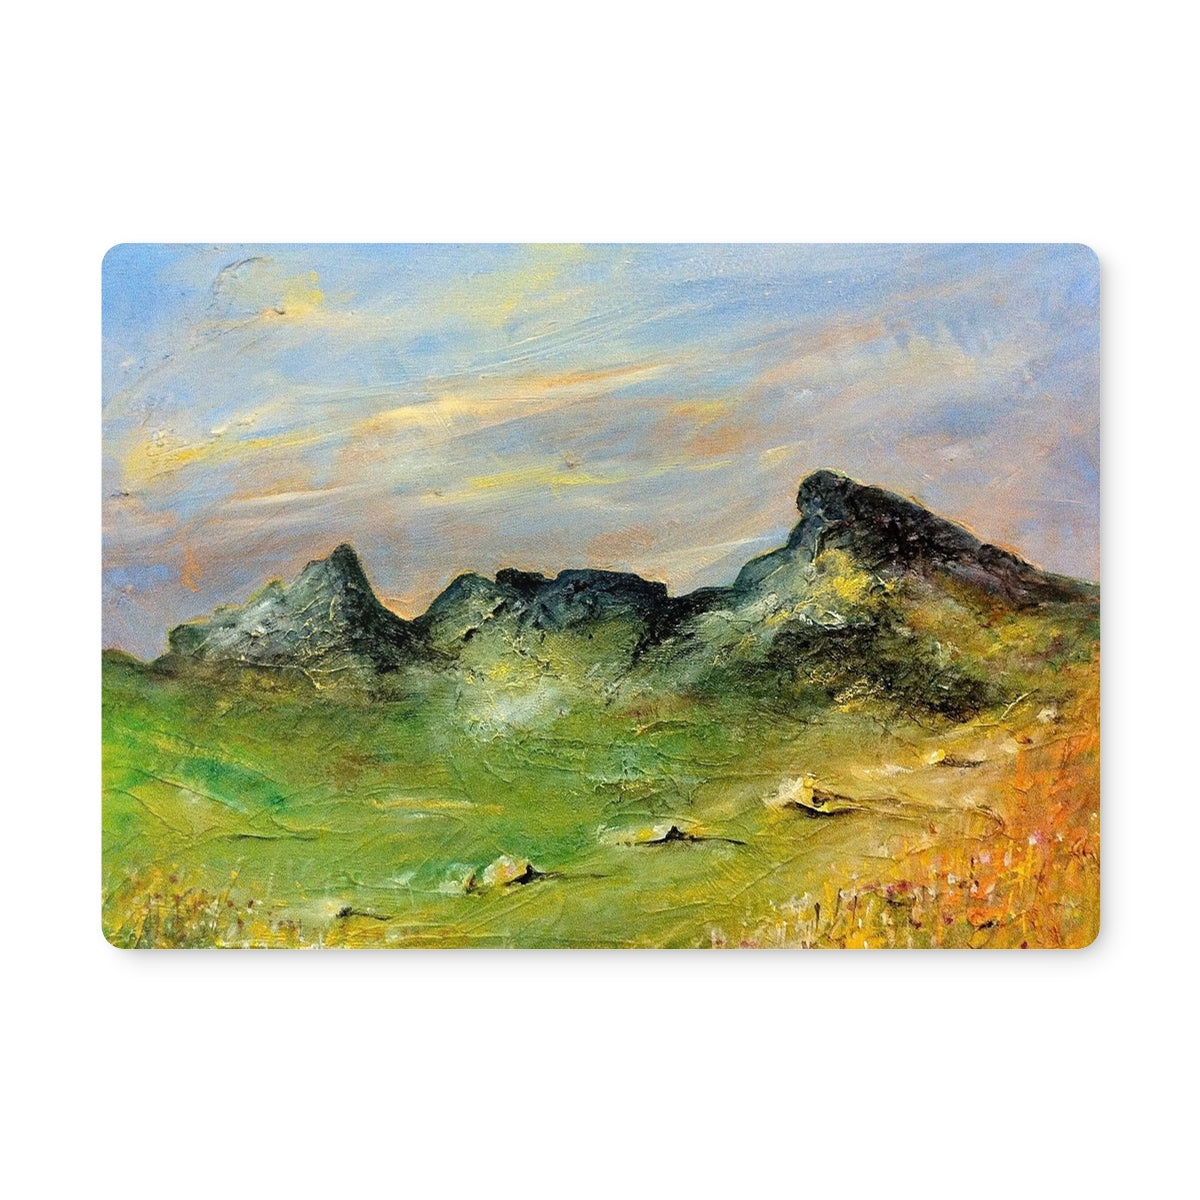 The Cobbler Art Gifts Placemat-Placemats-Scottish Lochs & Mountains Art Gallery-2 Placemats-Paintings, Prints, Homeware, Art Gifts From Scotland By Scottish Artist Kevin Hunter